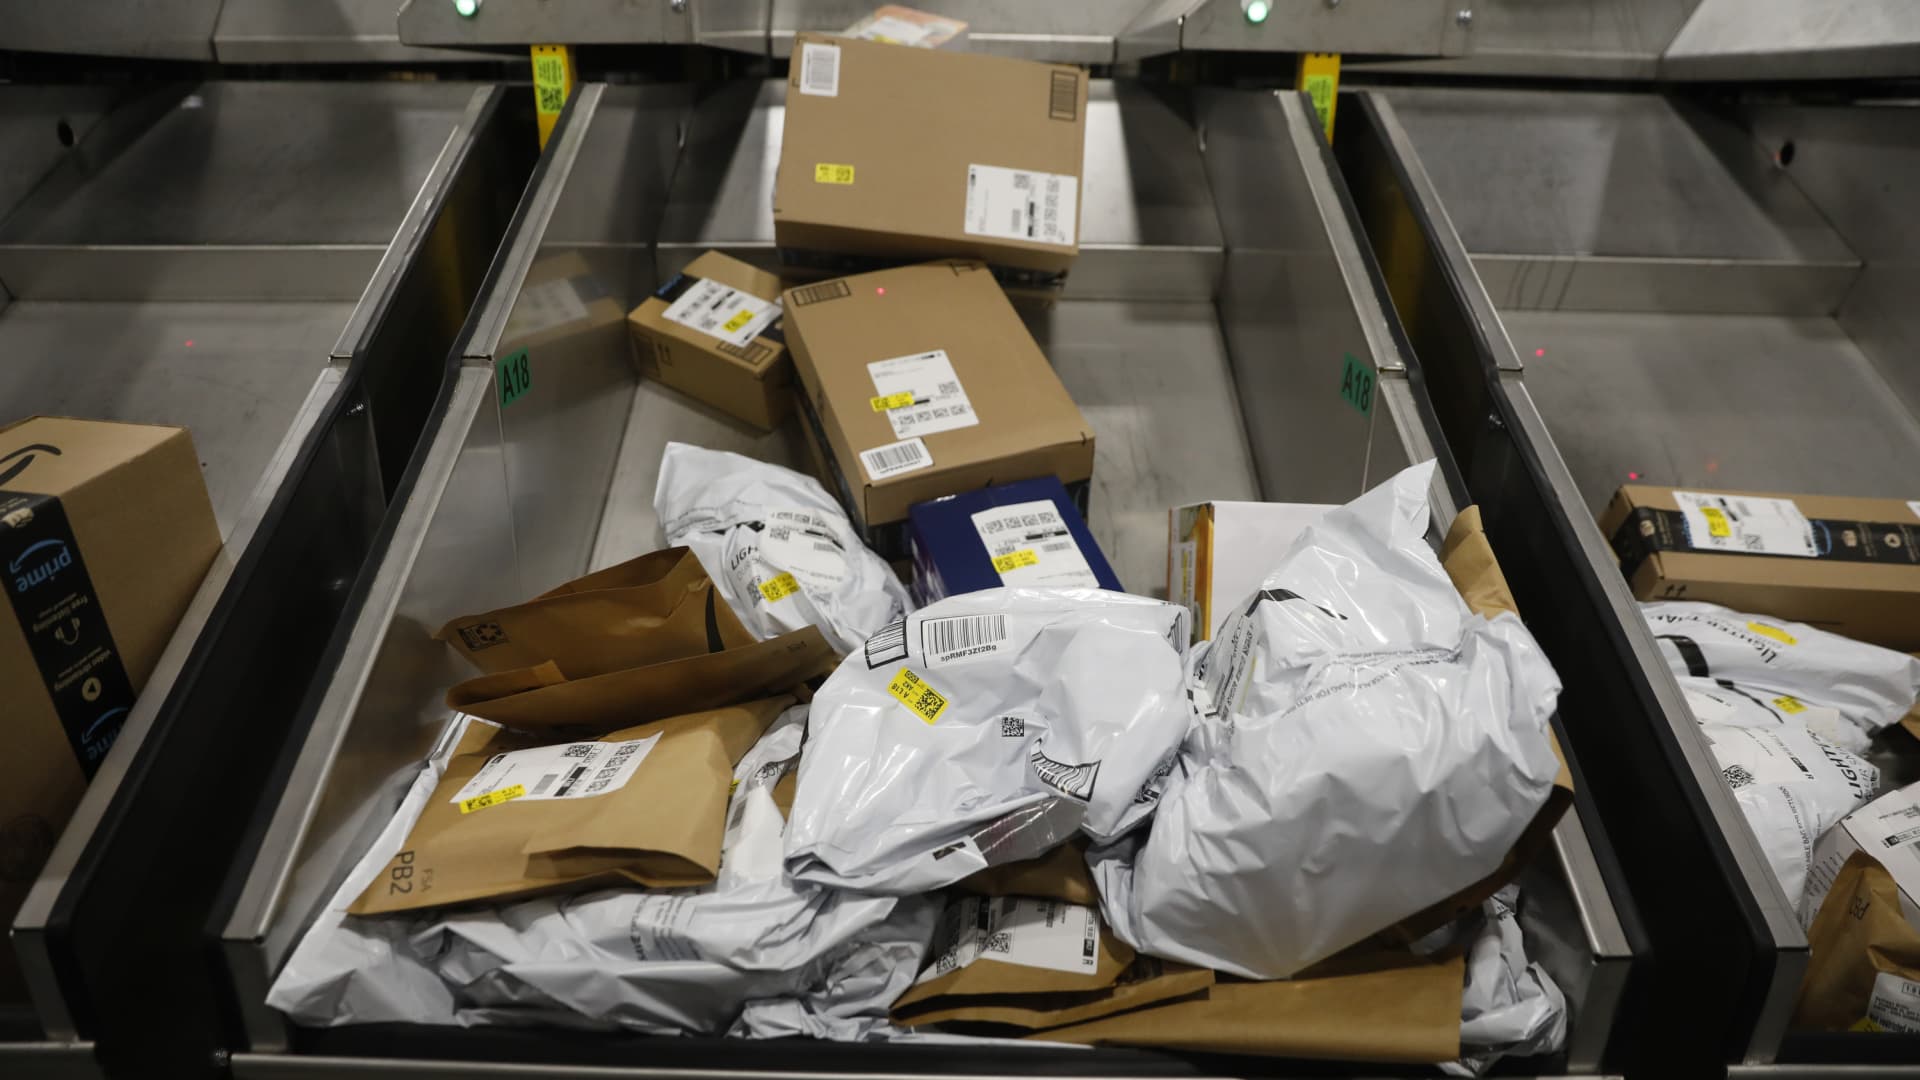 Amazon says 60% of Prime orders are arriving same day or next day